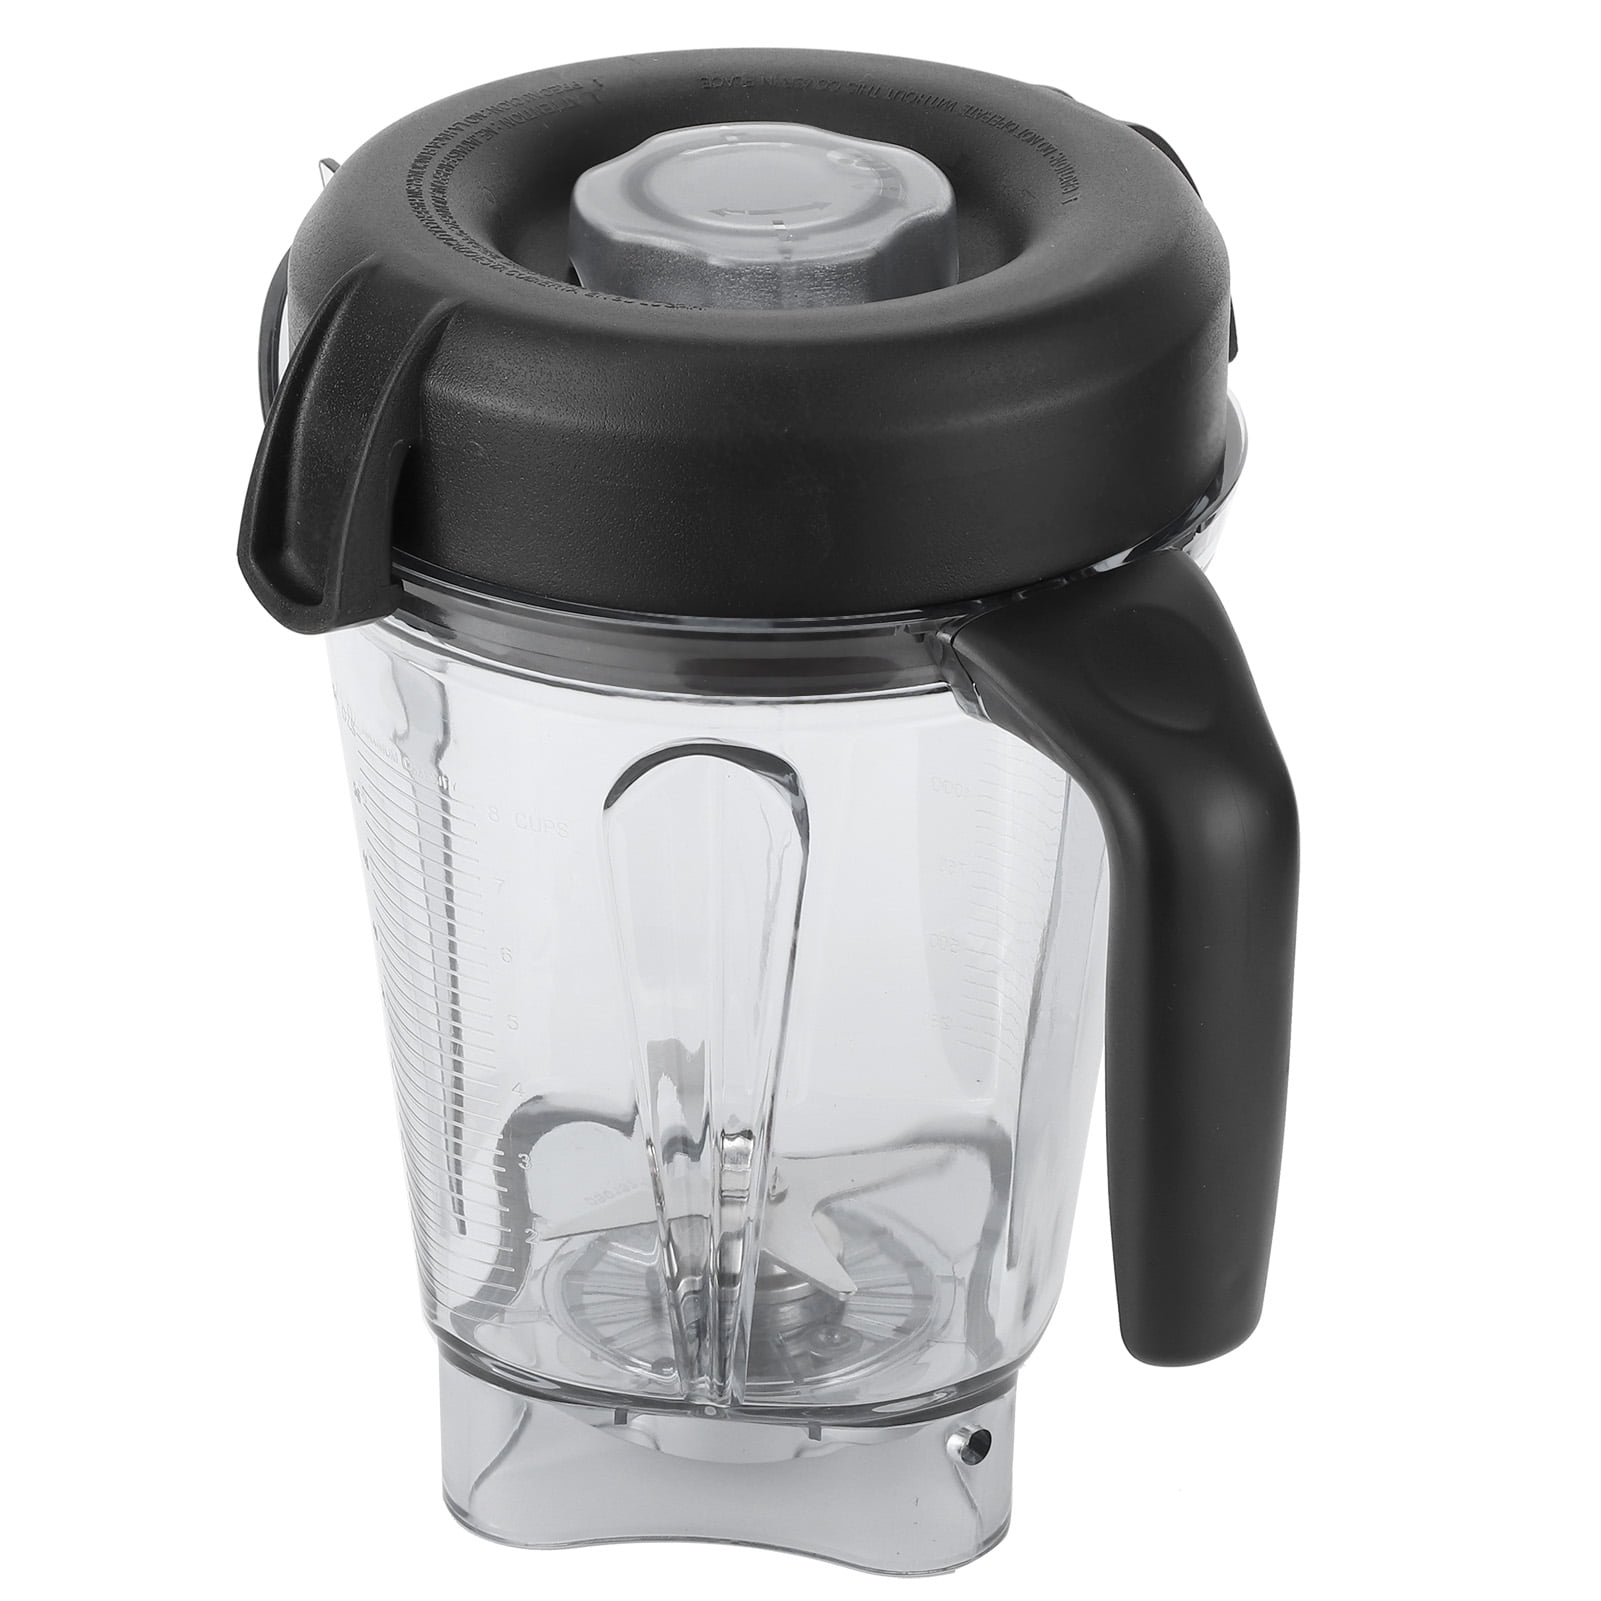  Vitamix Container, 64oz. Low-Profile & Personal Cup